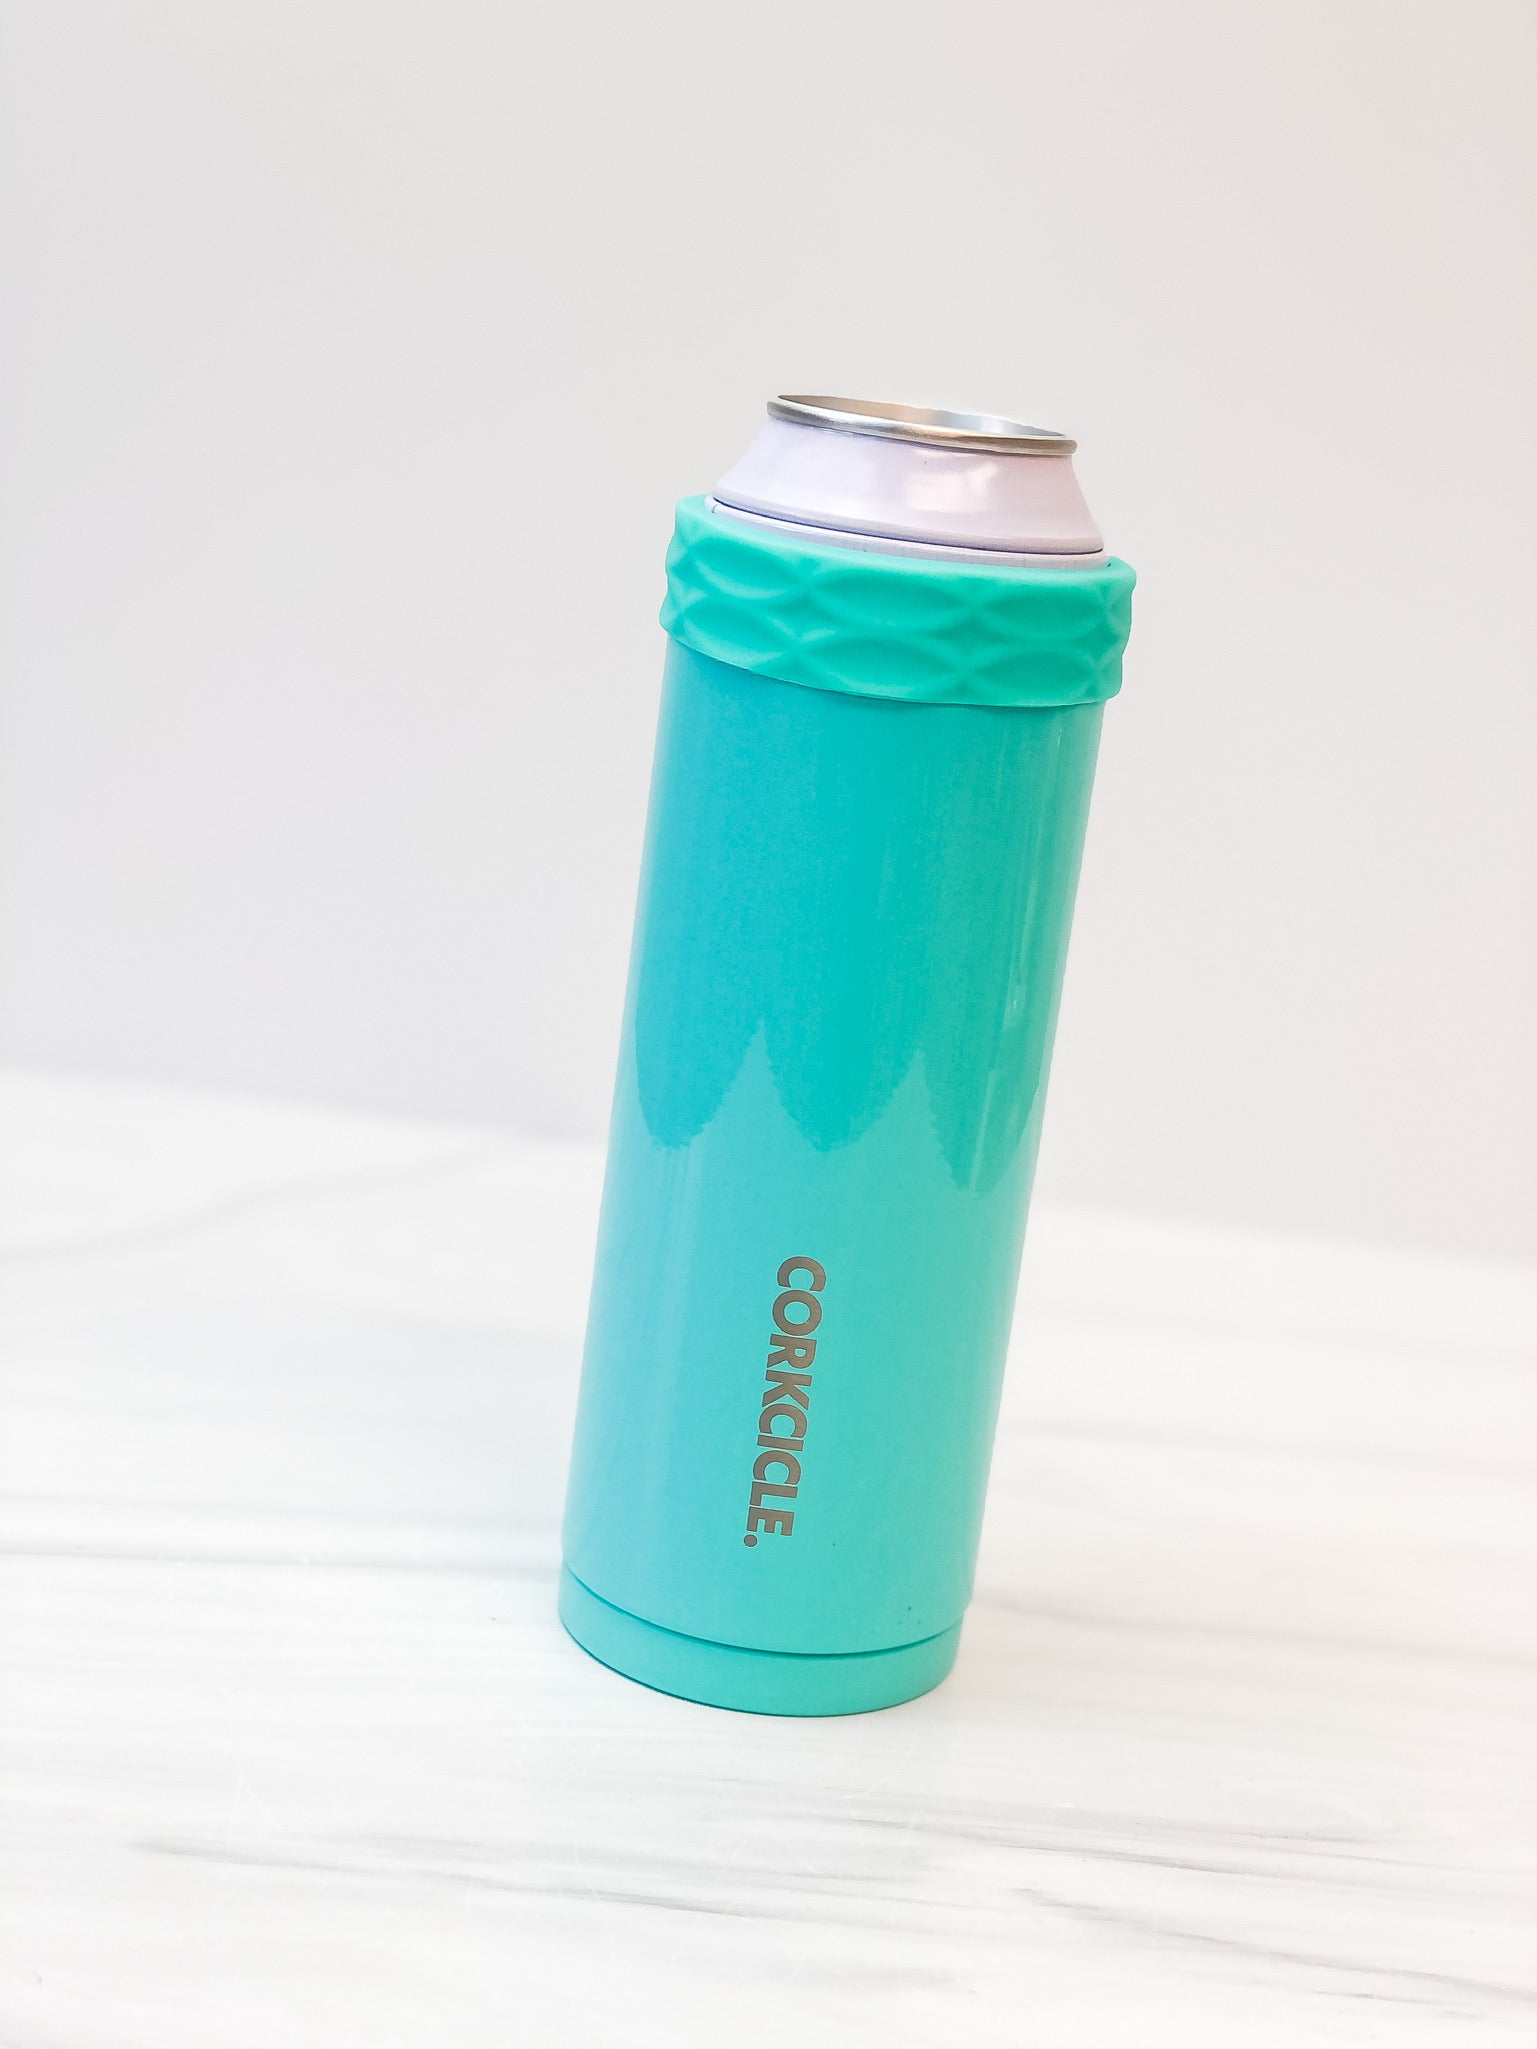 12 oz Stainless Steel Slim Arctican by Corkcicle - Gloss Turquoise